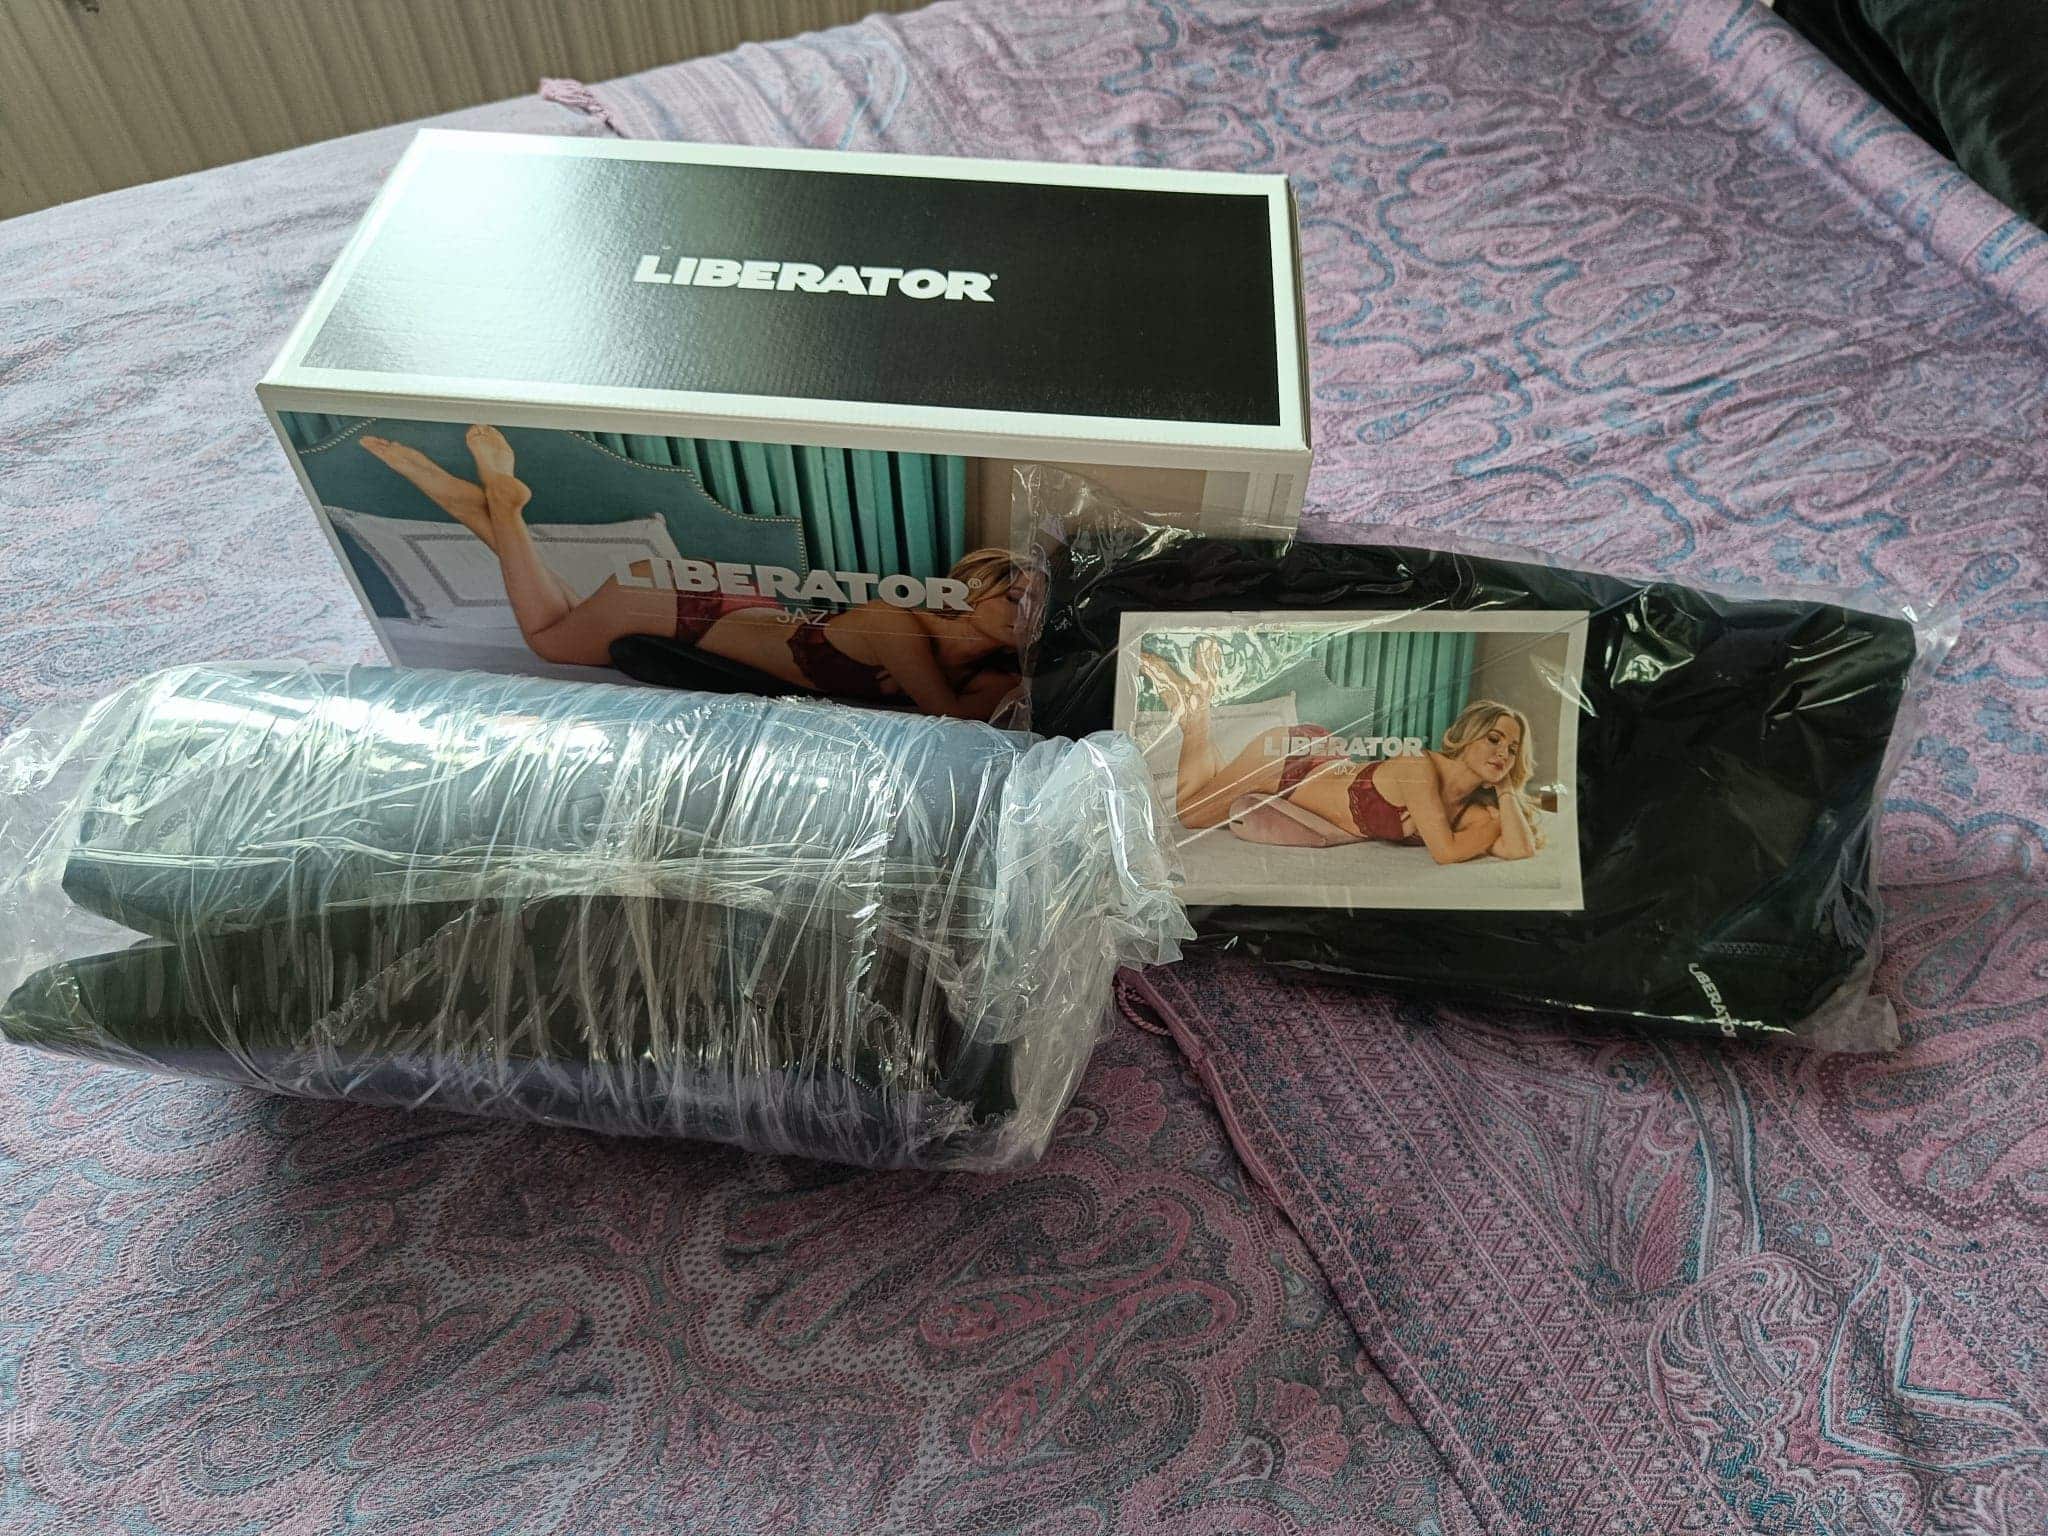 Liberator Jaz The Unboxing Experience: A Review